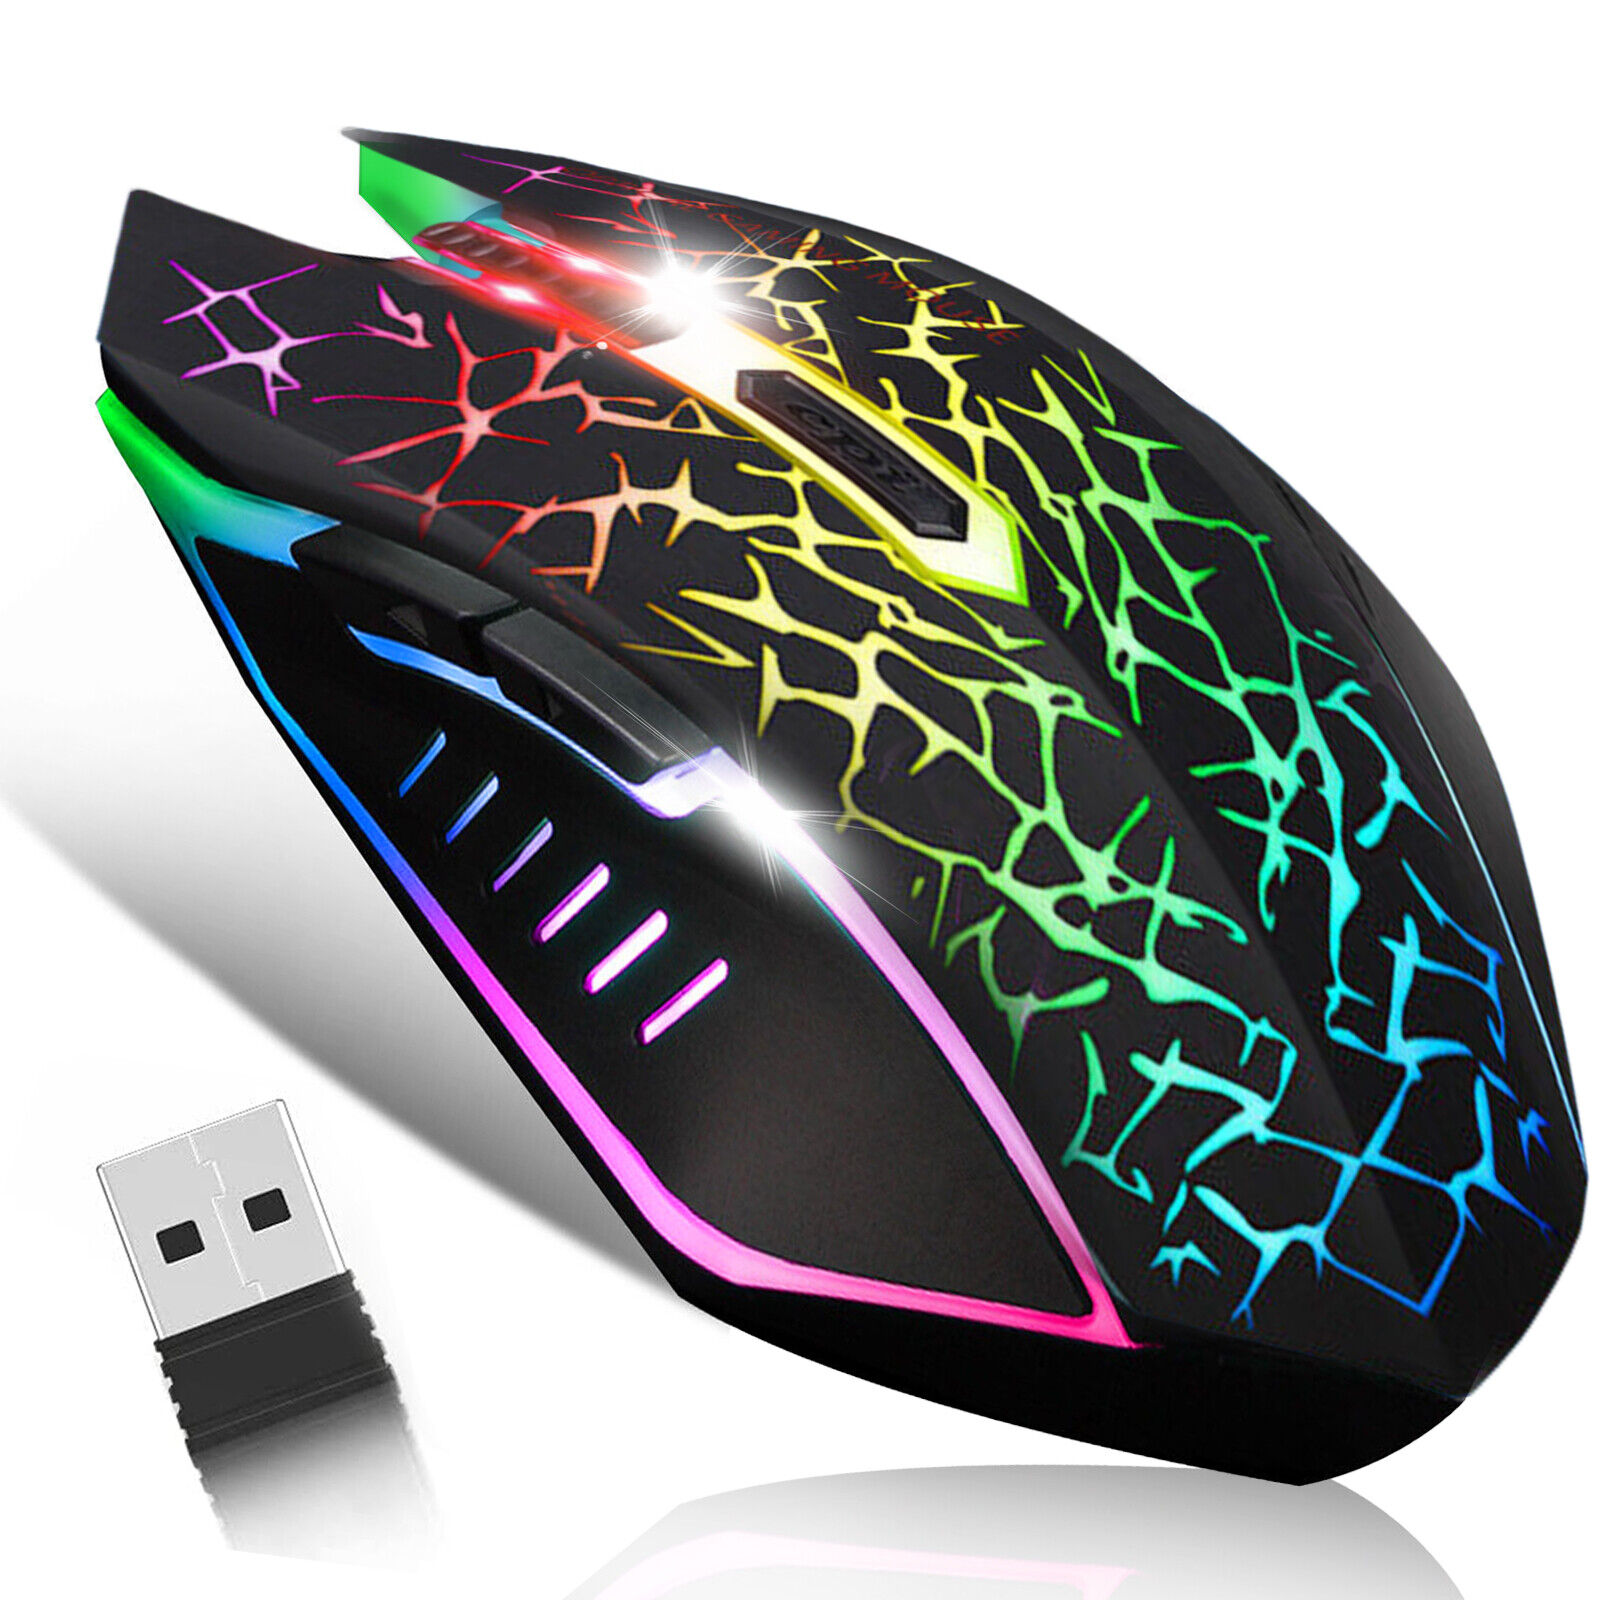 Wireless USB Optical Mice PC Gaming Mouse 7 Colors W/ USB Receiver Rechargeable